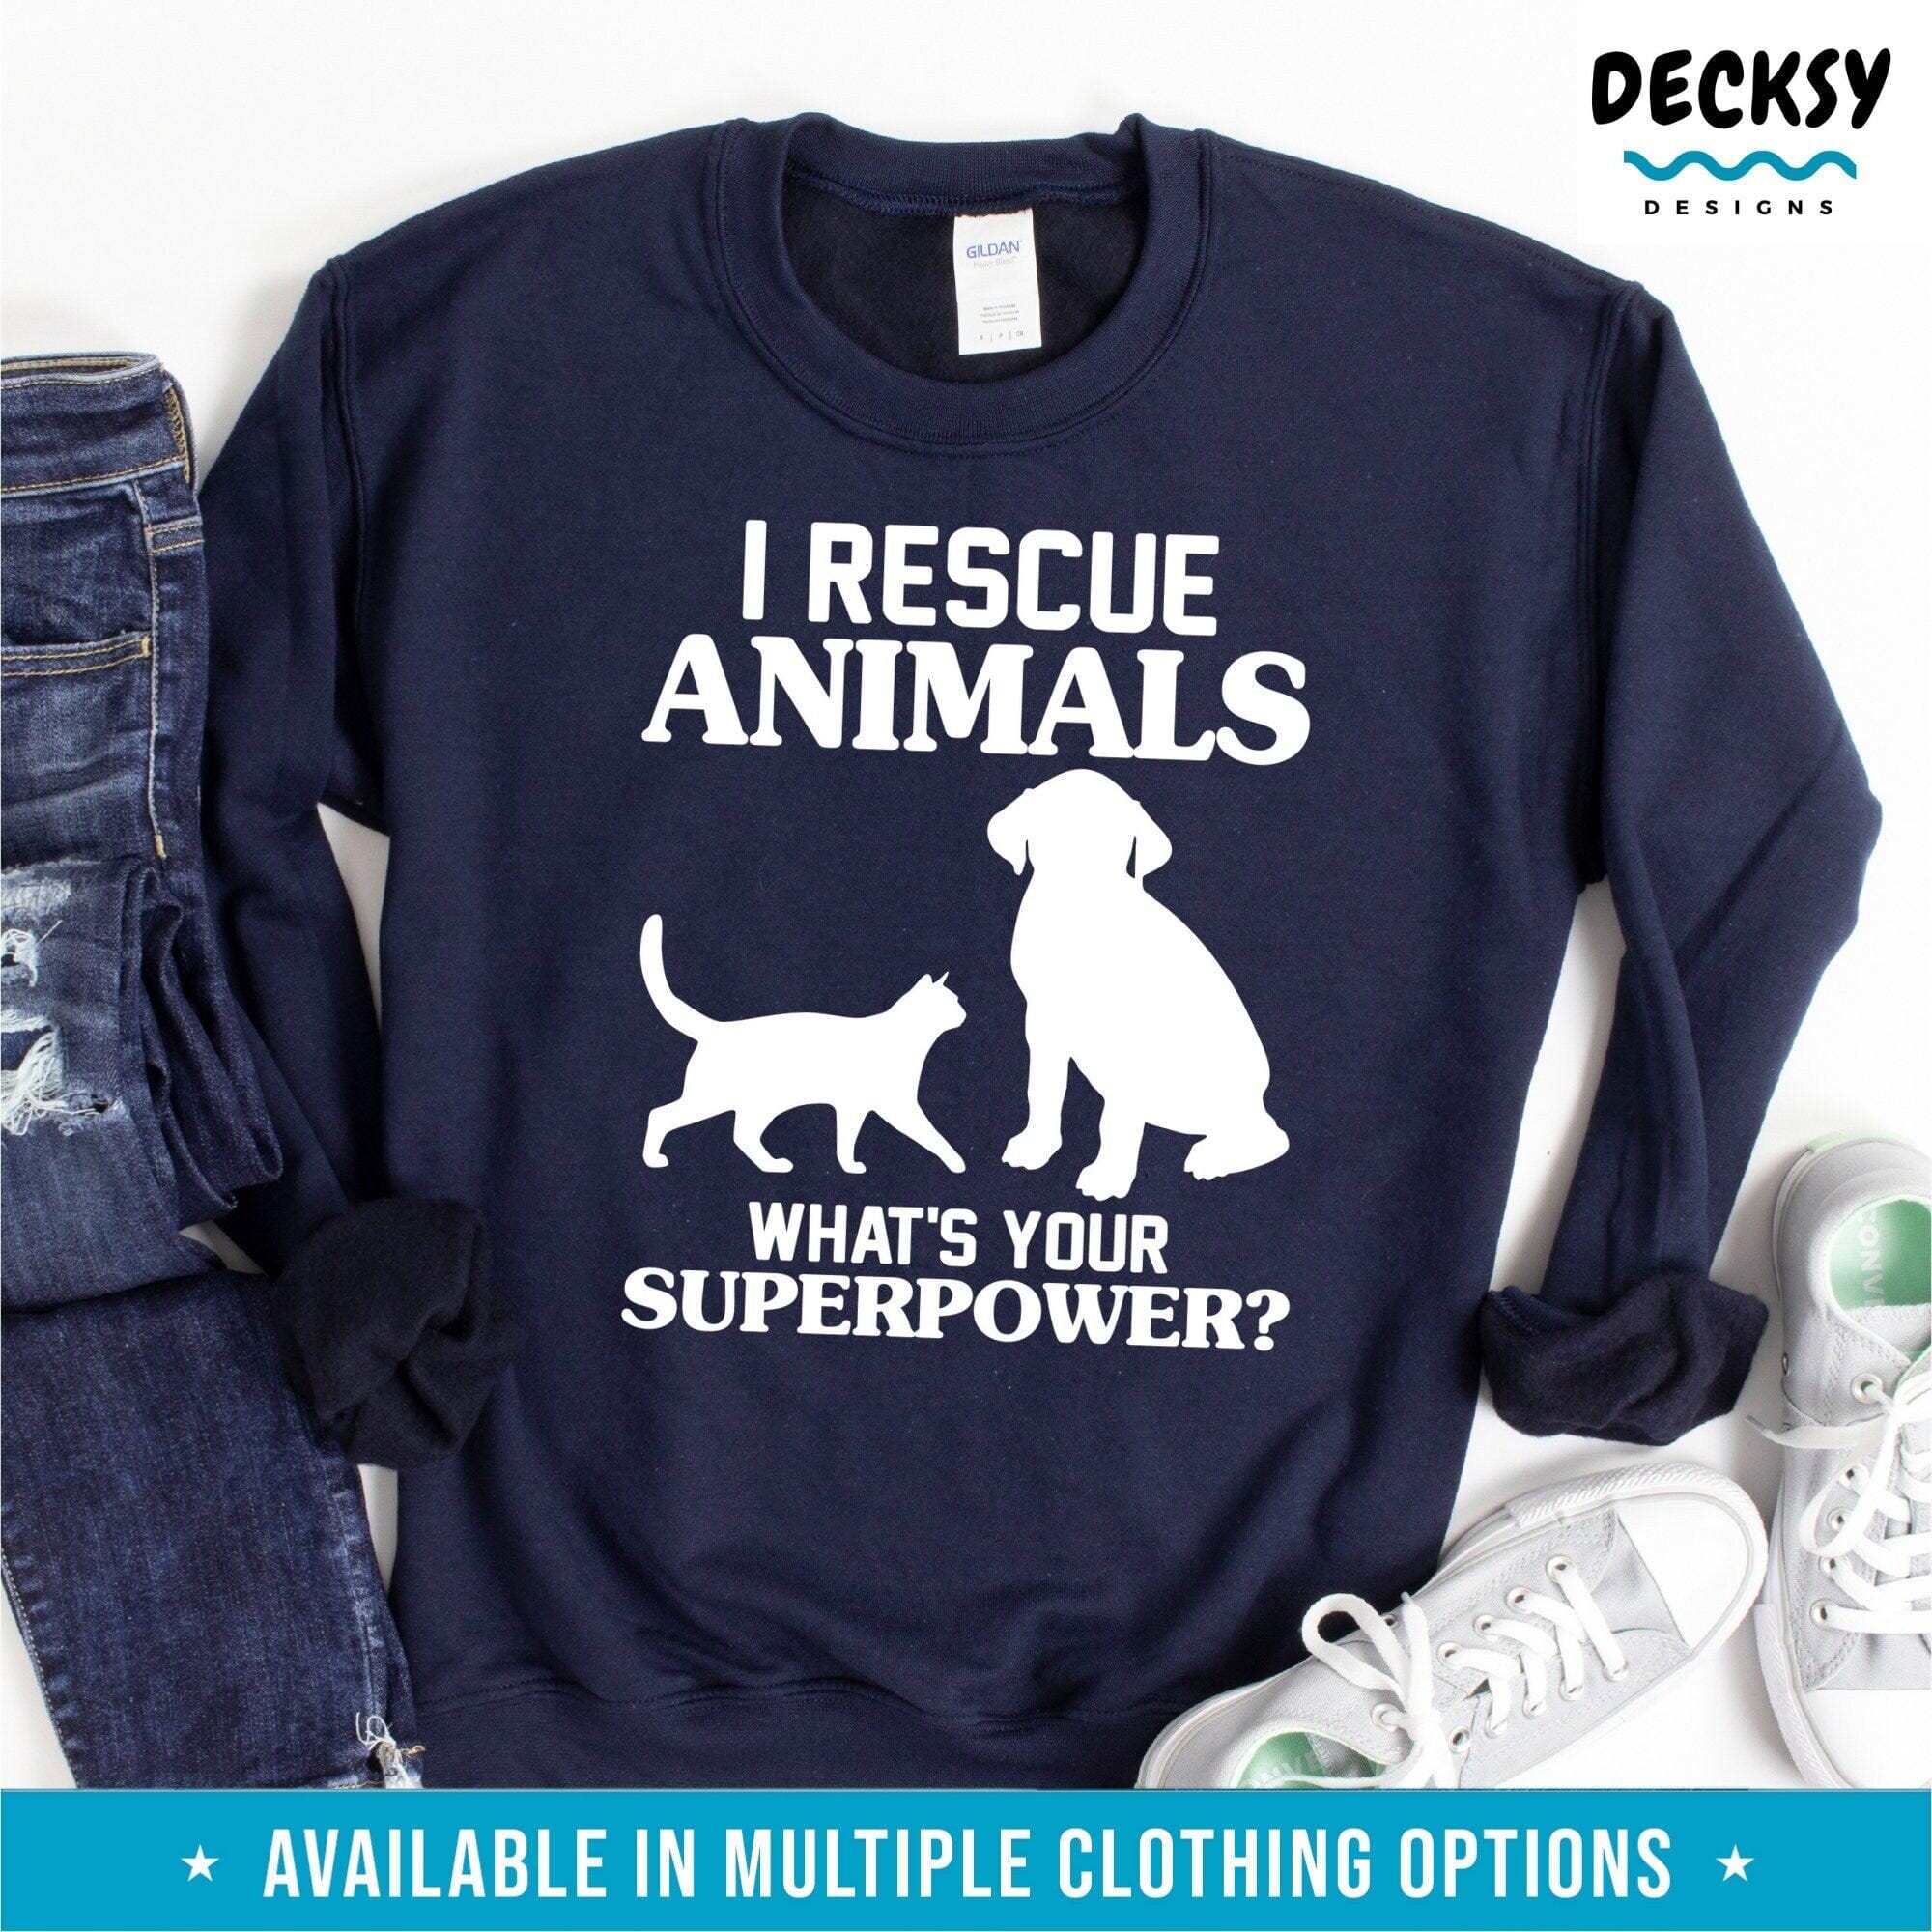 Animal Rescue Shirt, Pet Adoption Gift, Animal Shelter Tshirt-Clothing:Gender-Neutral Adult Clothing:Tops & Tees:T-shirts:Graphic Tees-DecksyDesigns